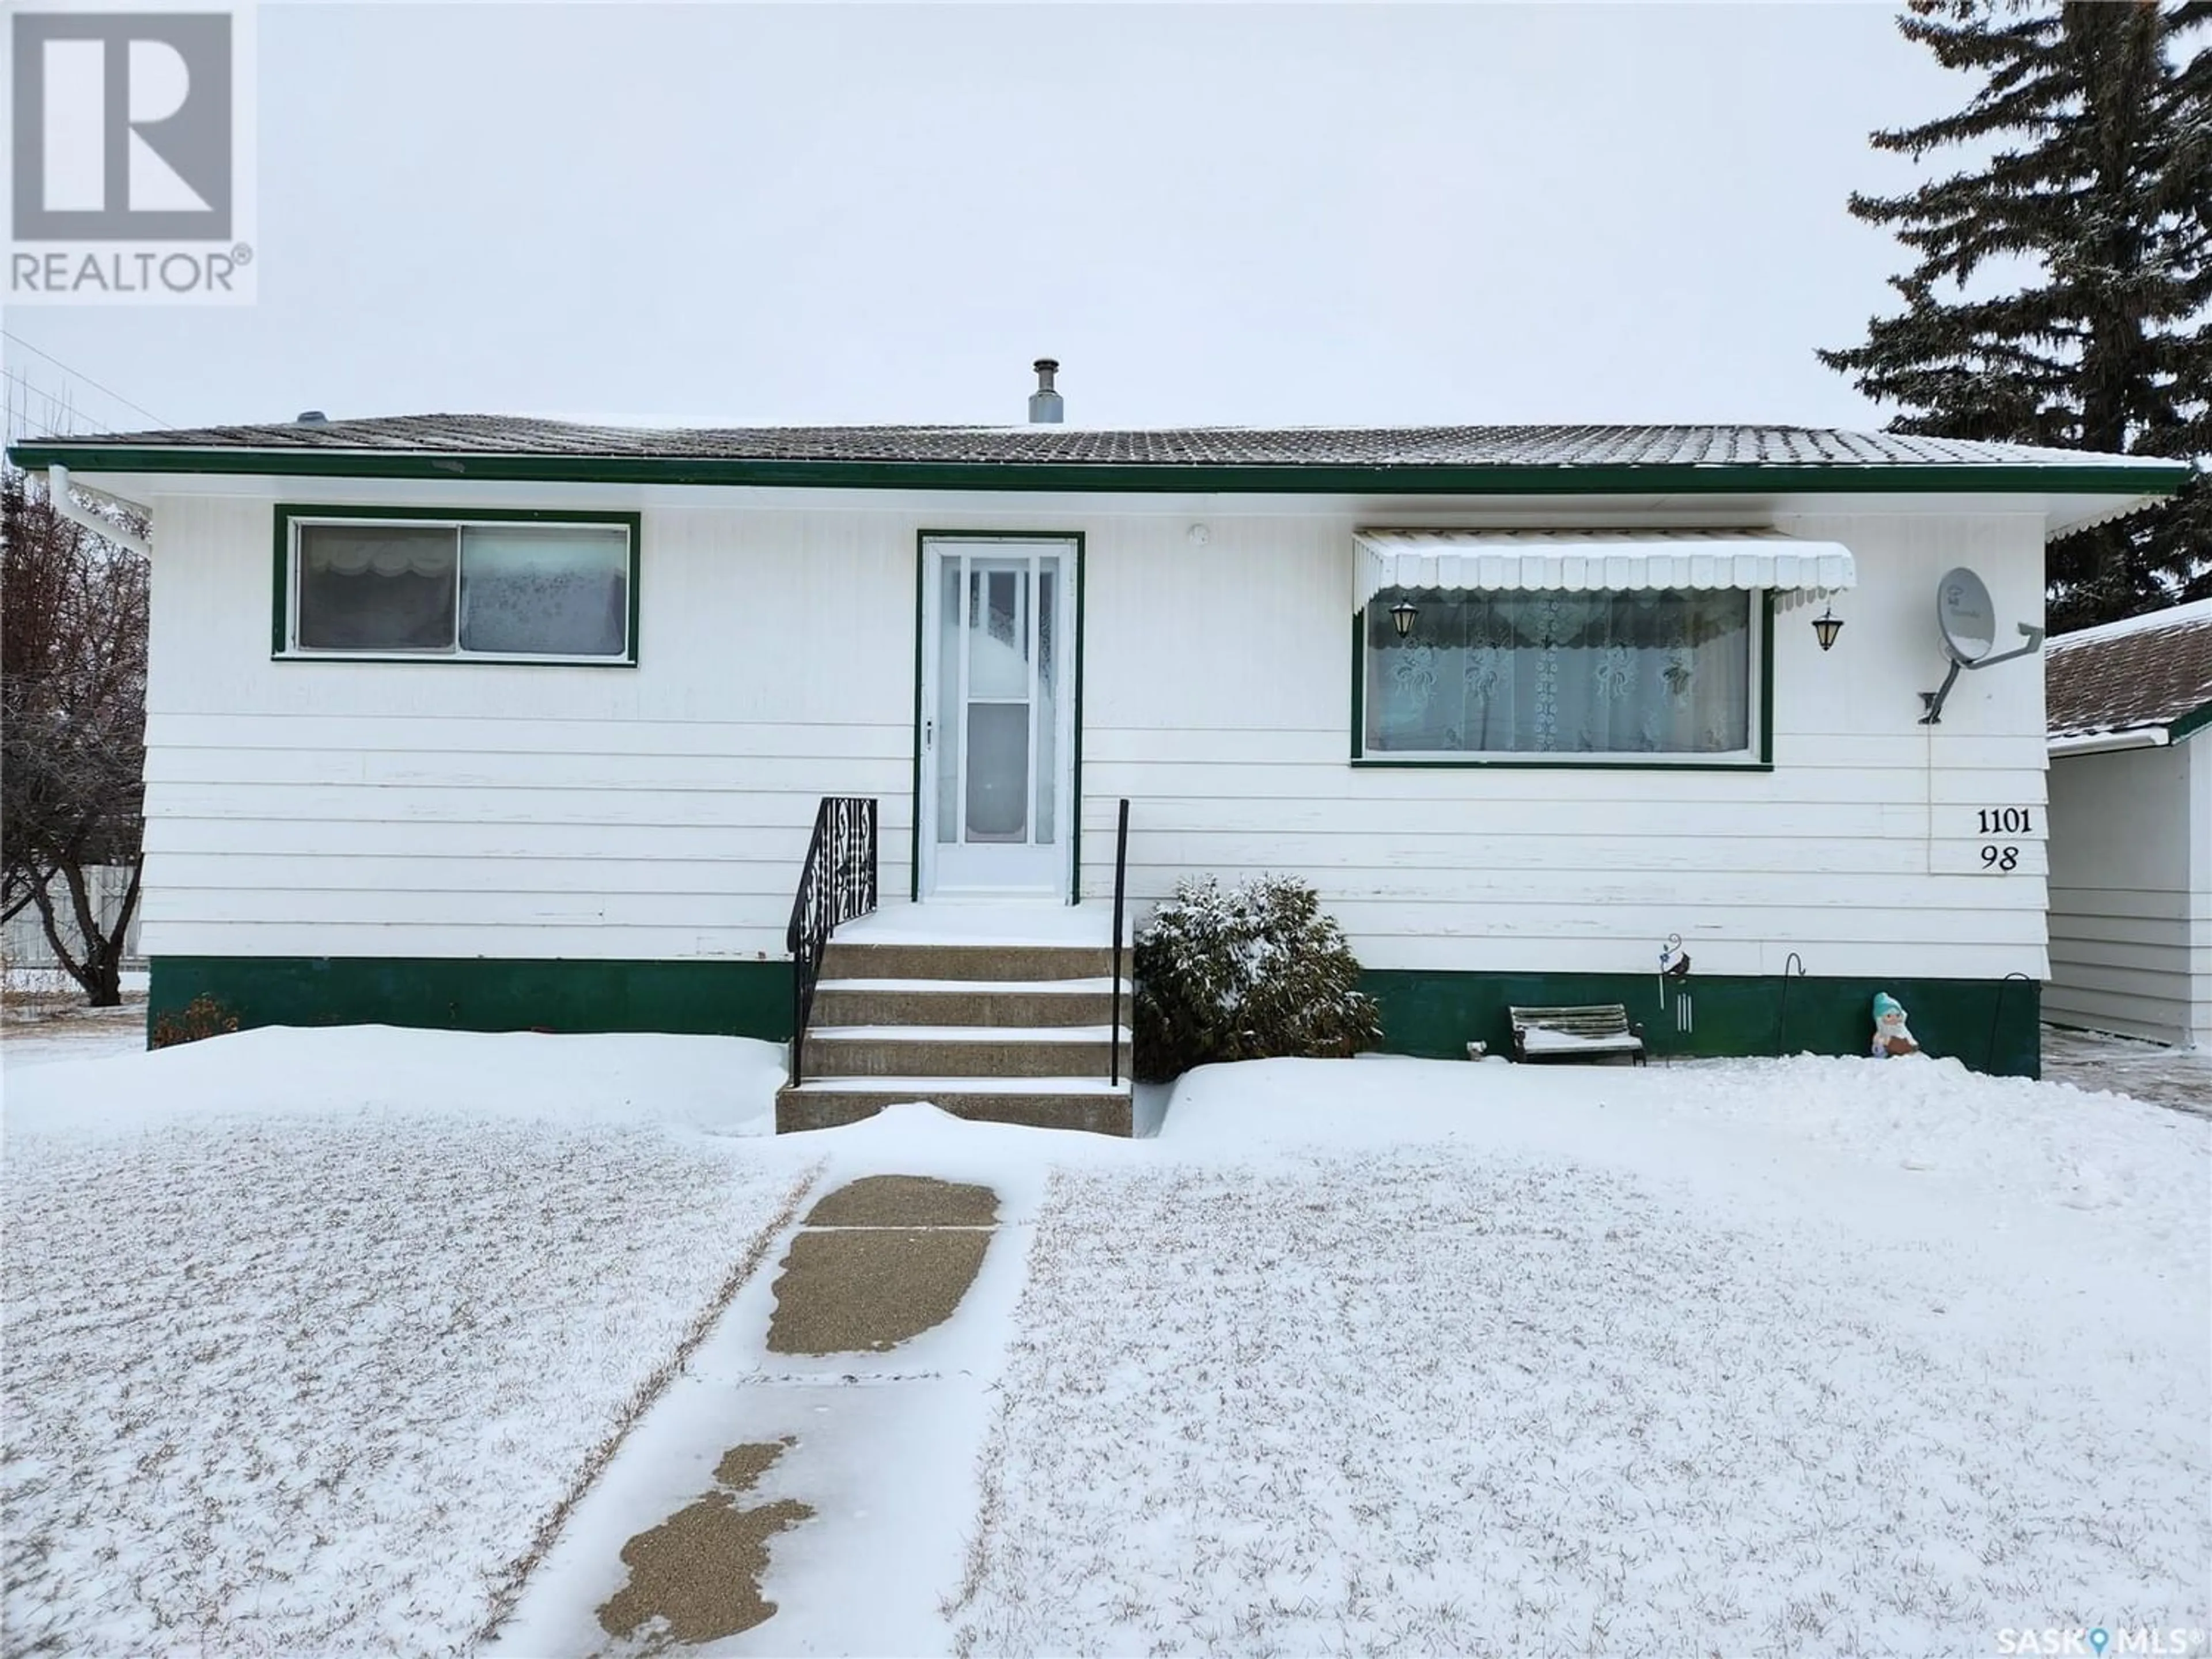 Home with unknown exterior material for 1101 98th STREET, Tisdale Saskatchewan S0E1T0